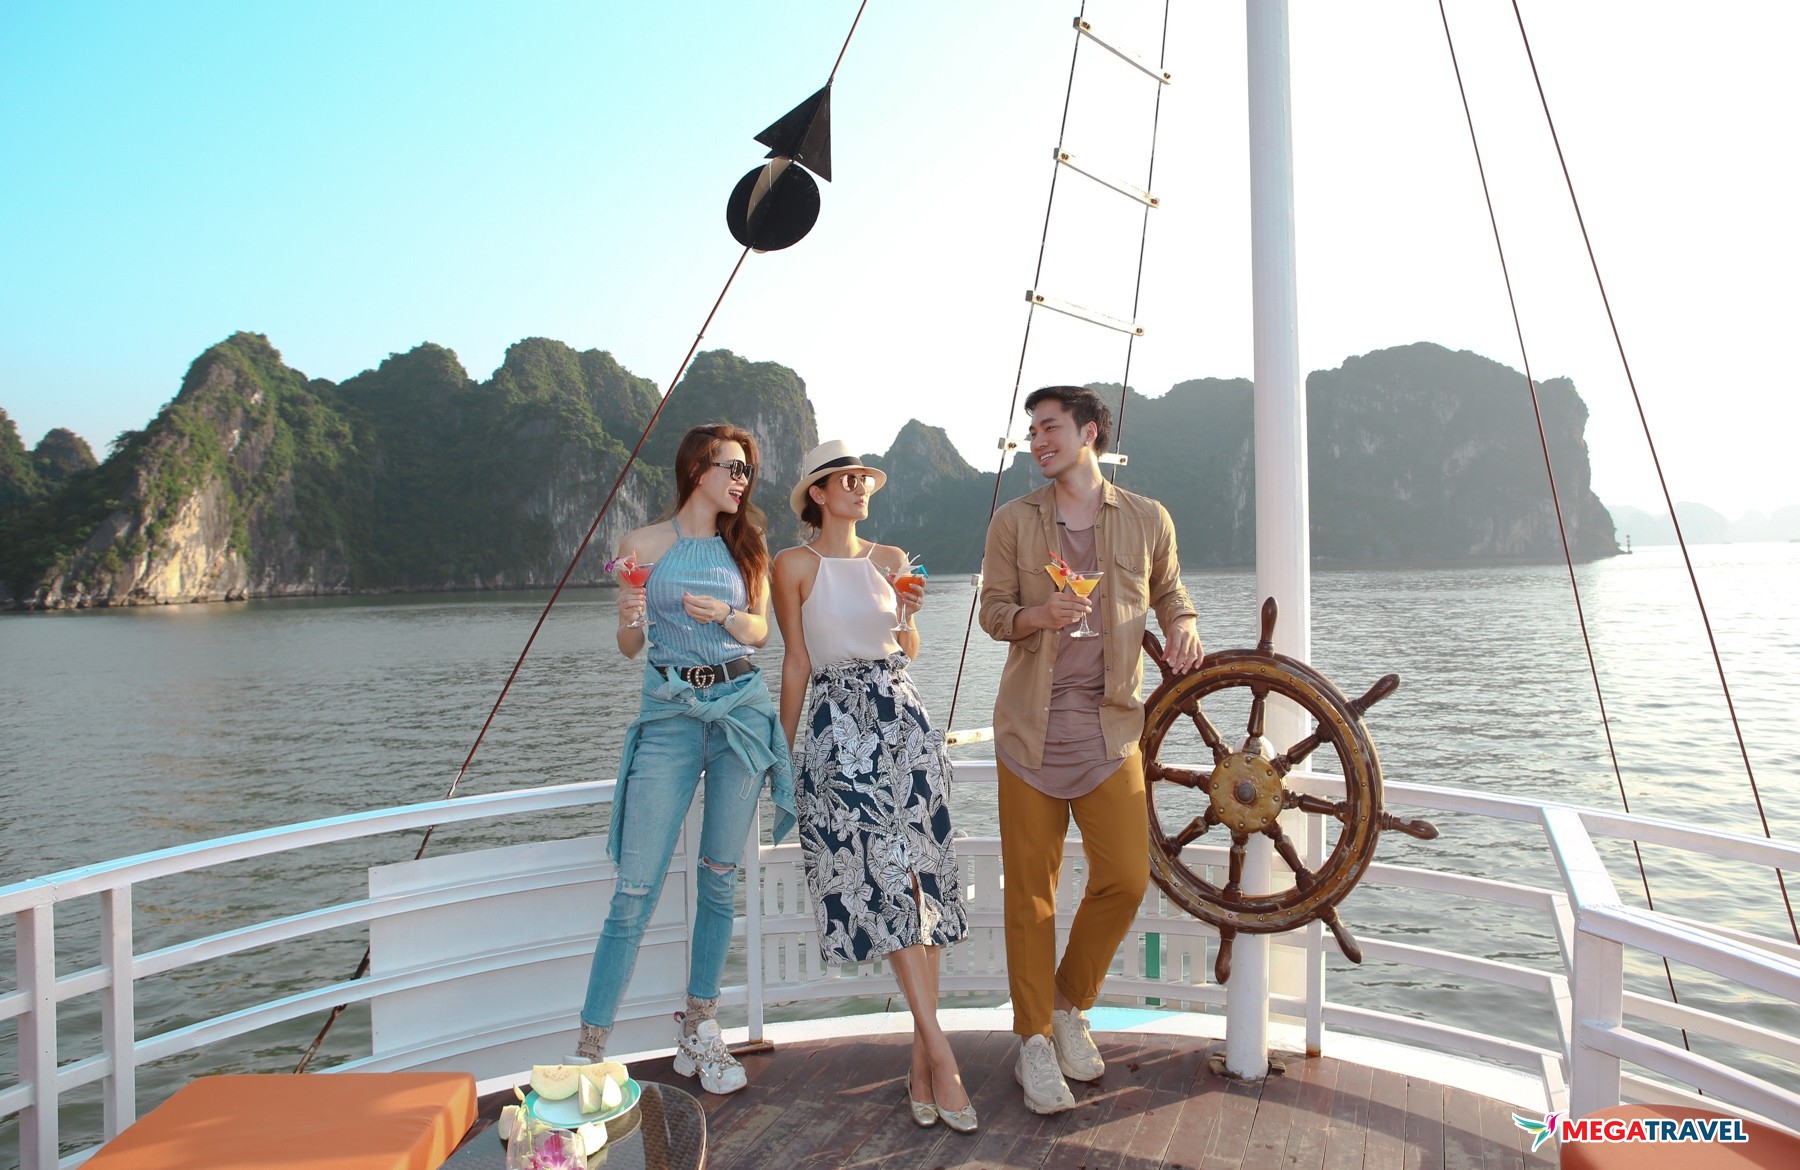 Tips for travelling to HaLong Bay, Viet Nam